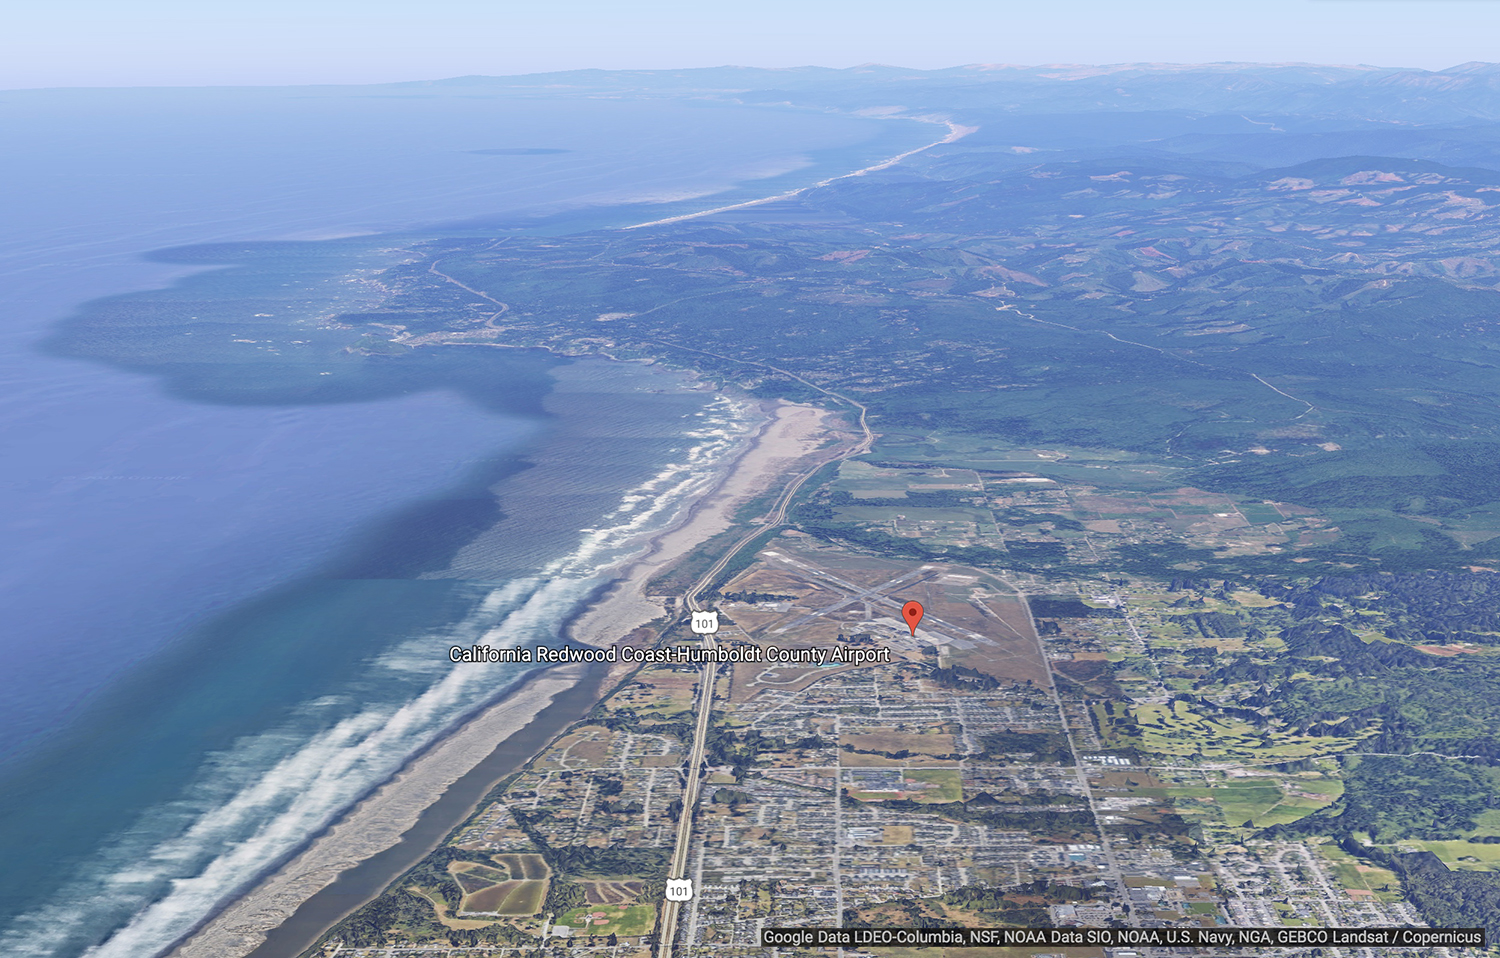 Aerial image of coastline and town of McKinleyville, CA, with airport marked